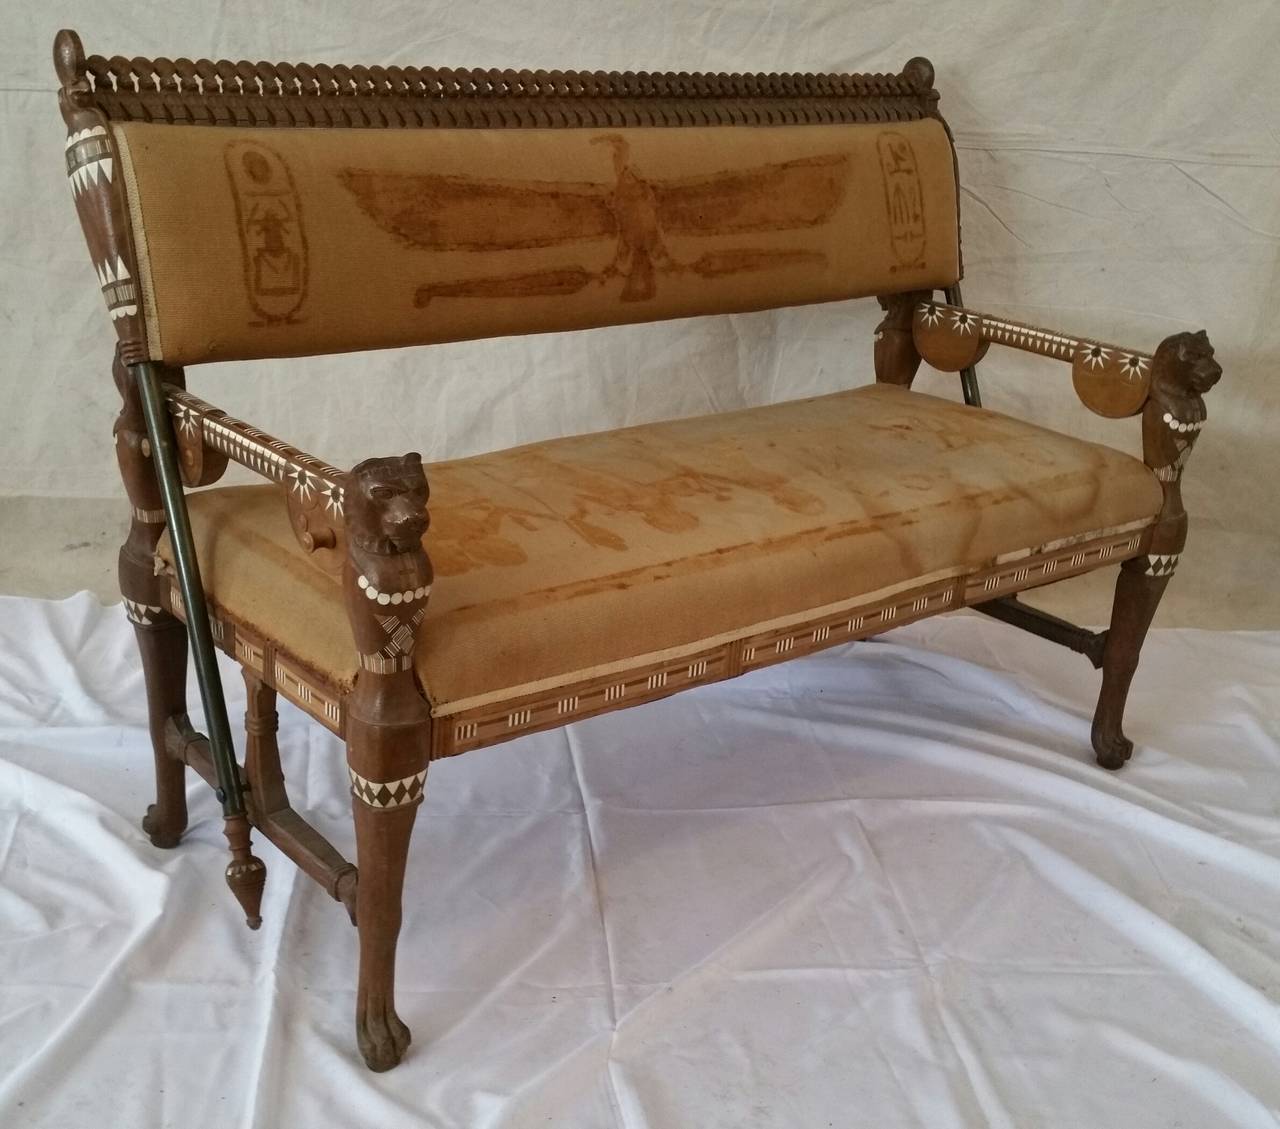 Egyptian Revival loveseat composed of rosewood inlaid with bone,ebony ,,Upholstered in a burlap fabric in Egyptian motif,,original,The loveseat features reversable back and decorative Egyptian carvings,,Similar example can be found in the Victoria &